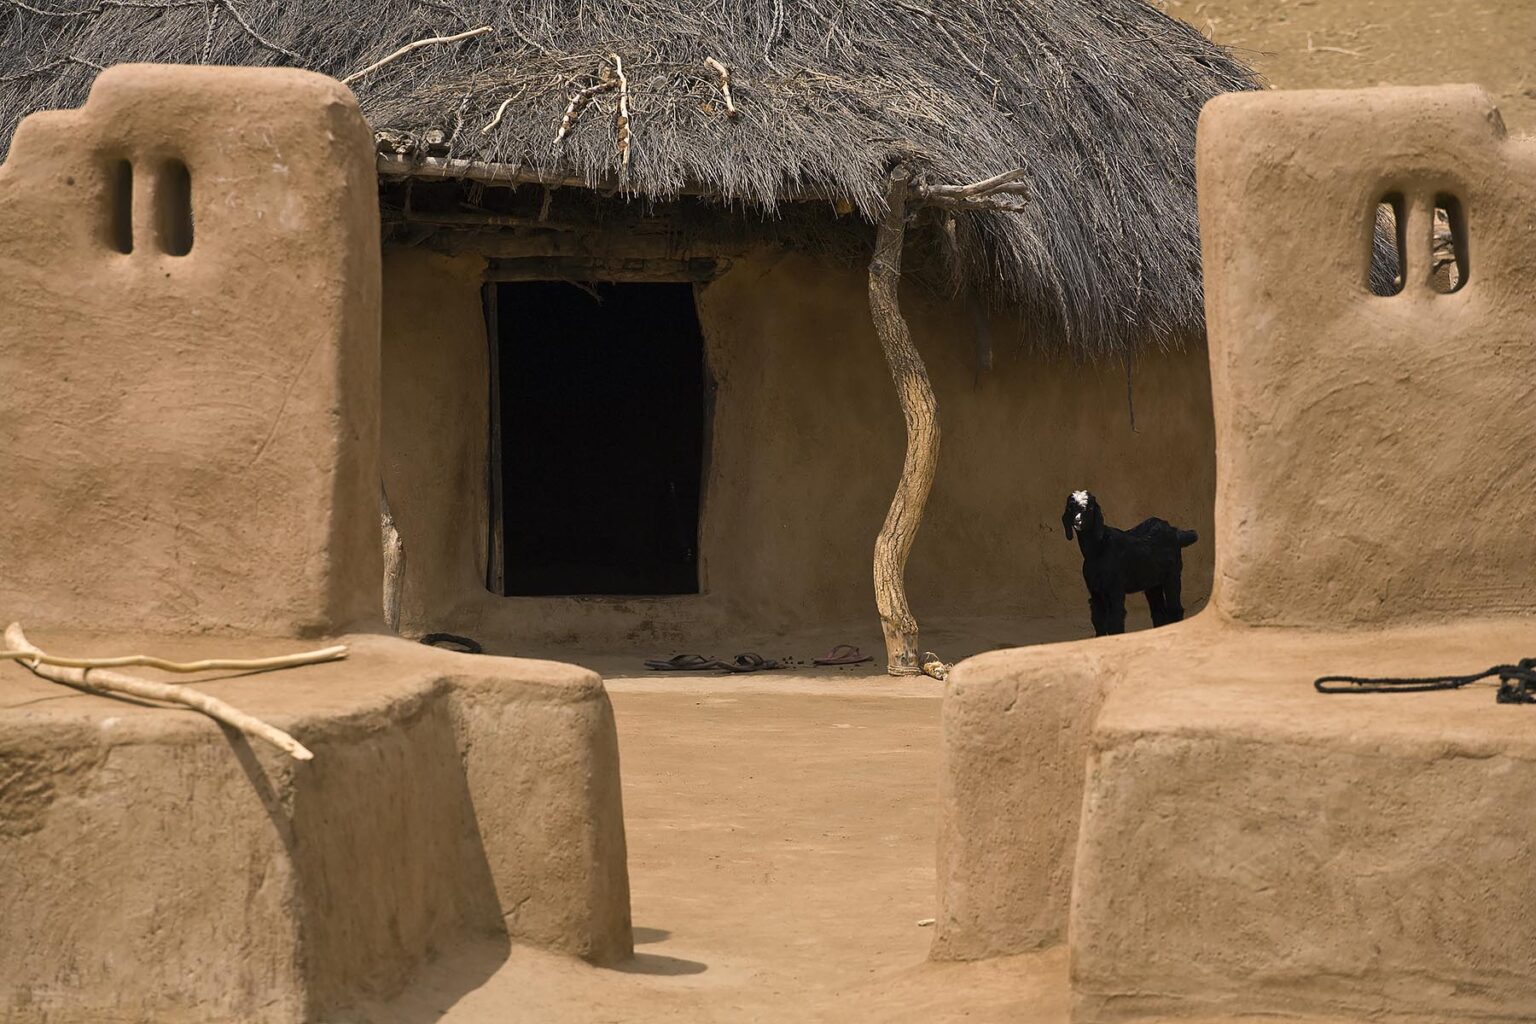 A classic MUD HOUSE with a GOAT in the village in the THAR DESERT near JAISALMER - RAJASTHAN, INDIA